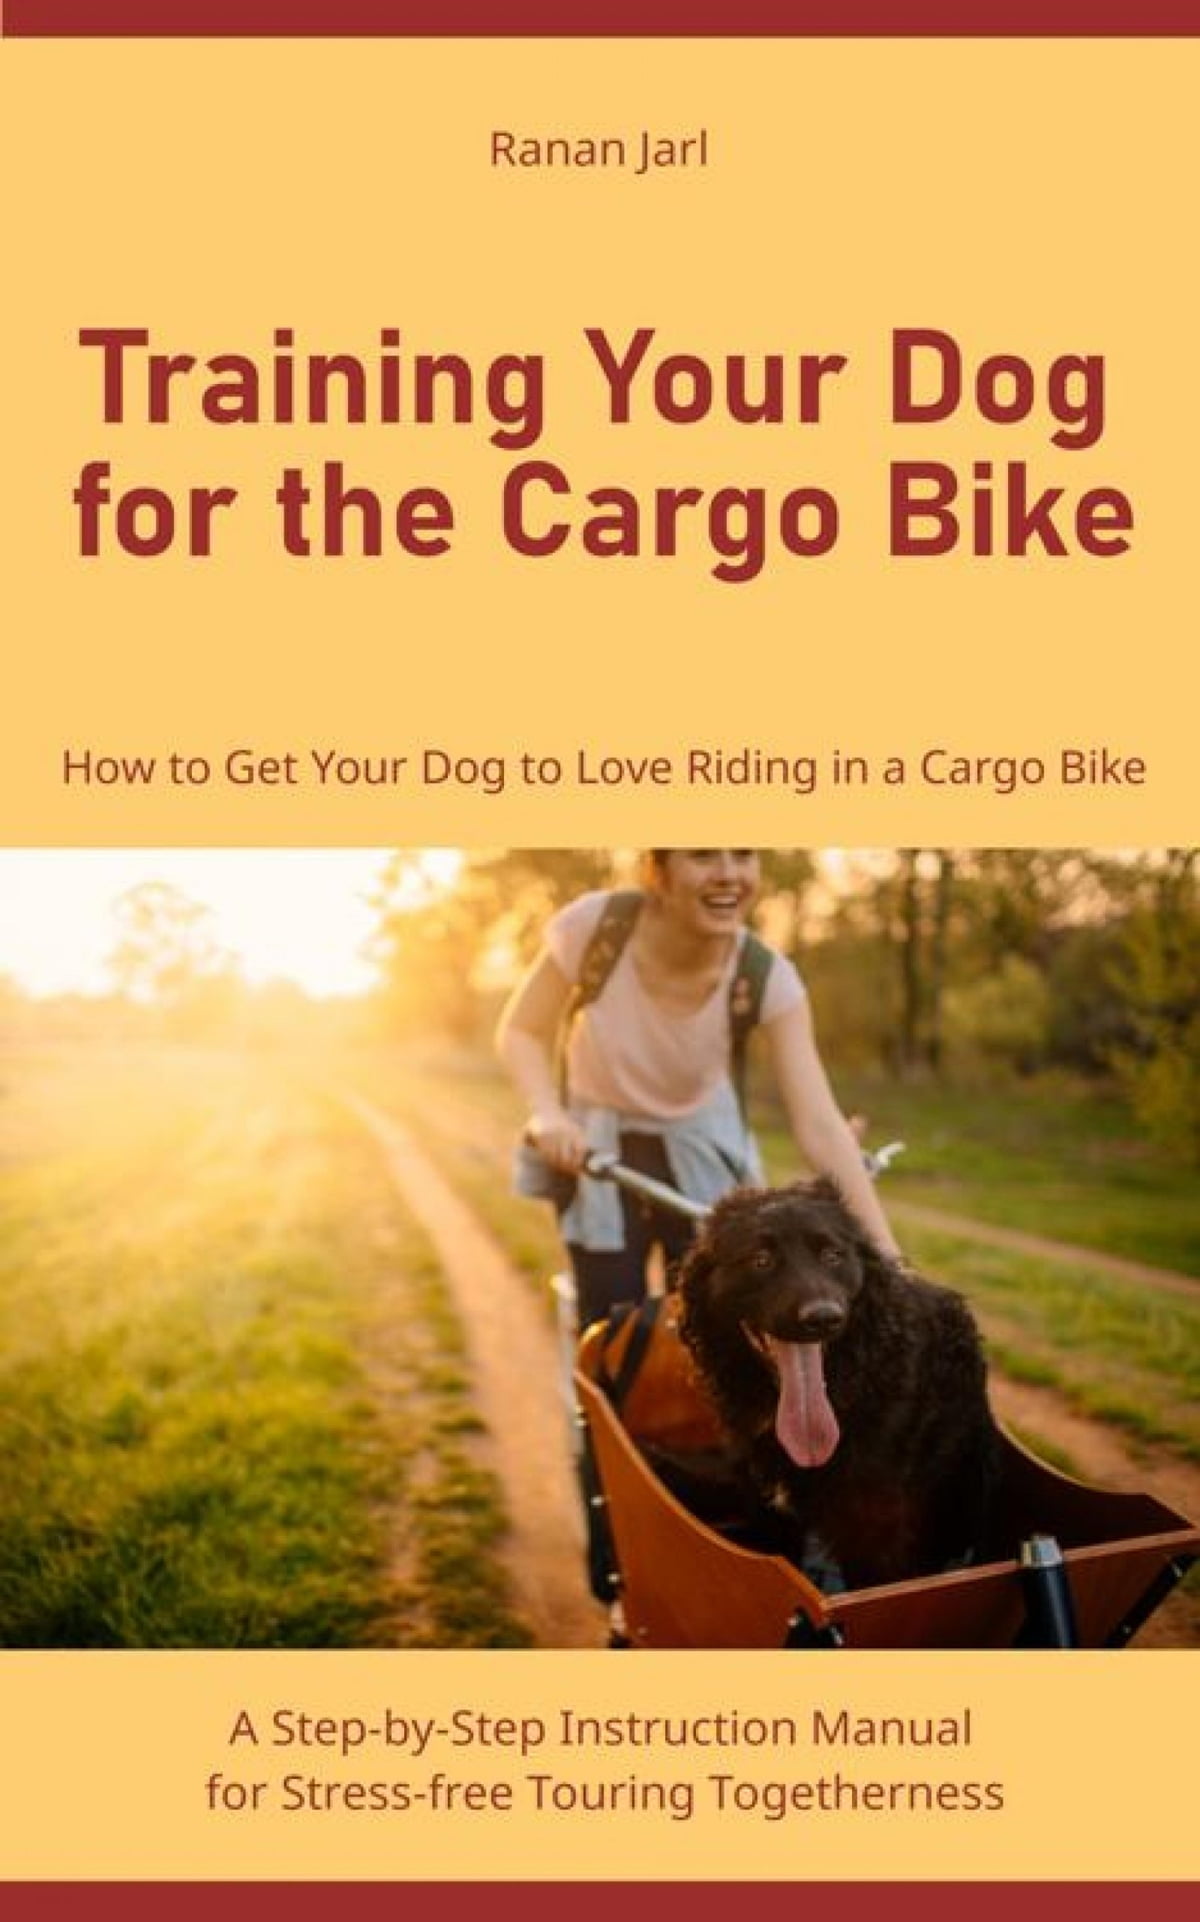 Six Tips For Safely Bike Riding With Your Pets